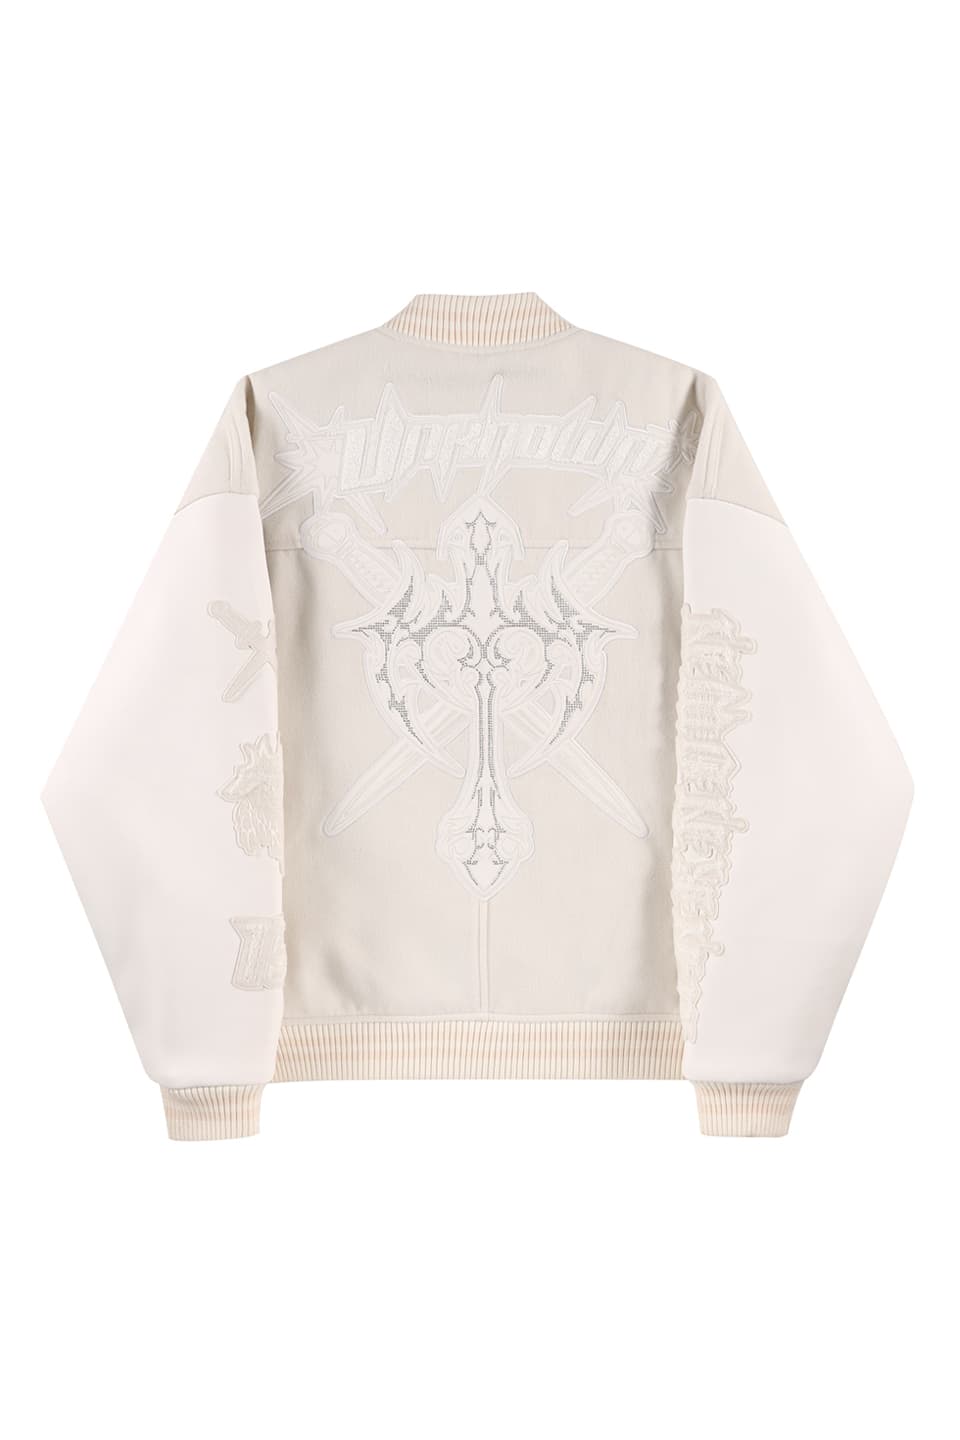 Graphic Patches Varsity Jacket